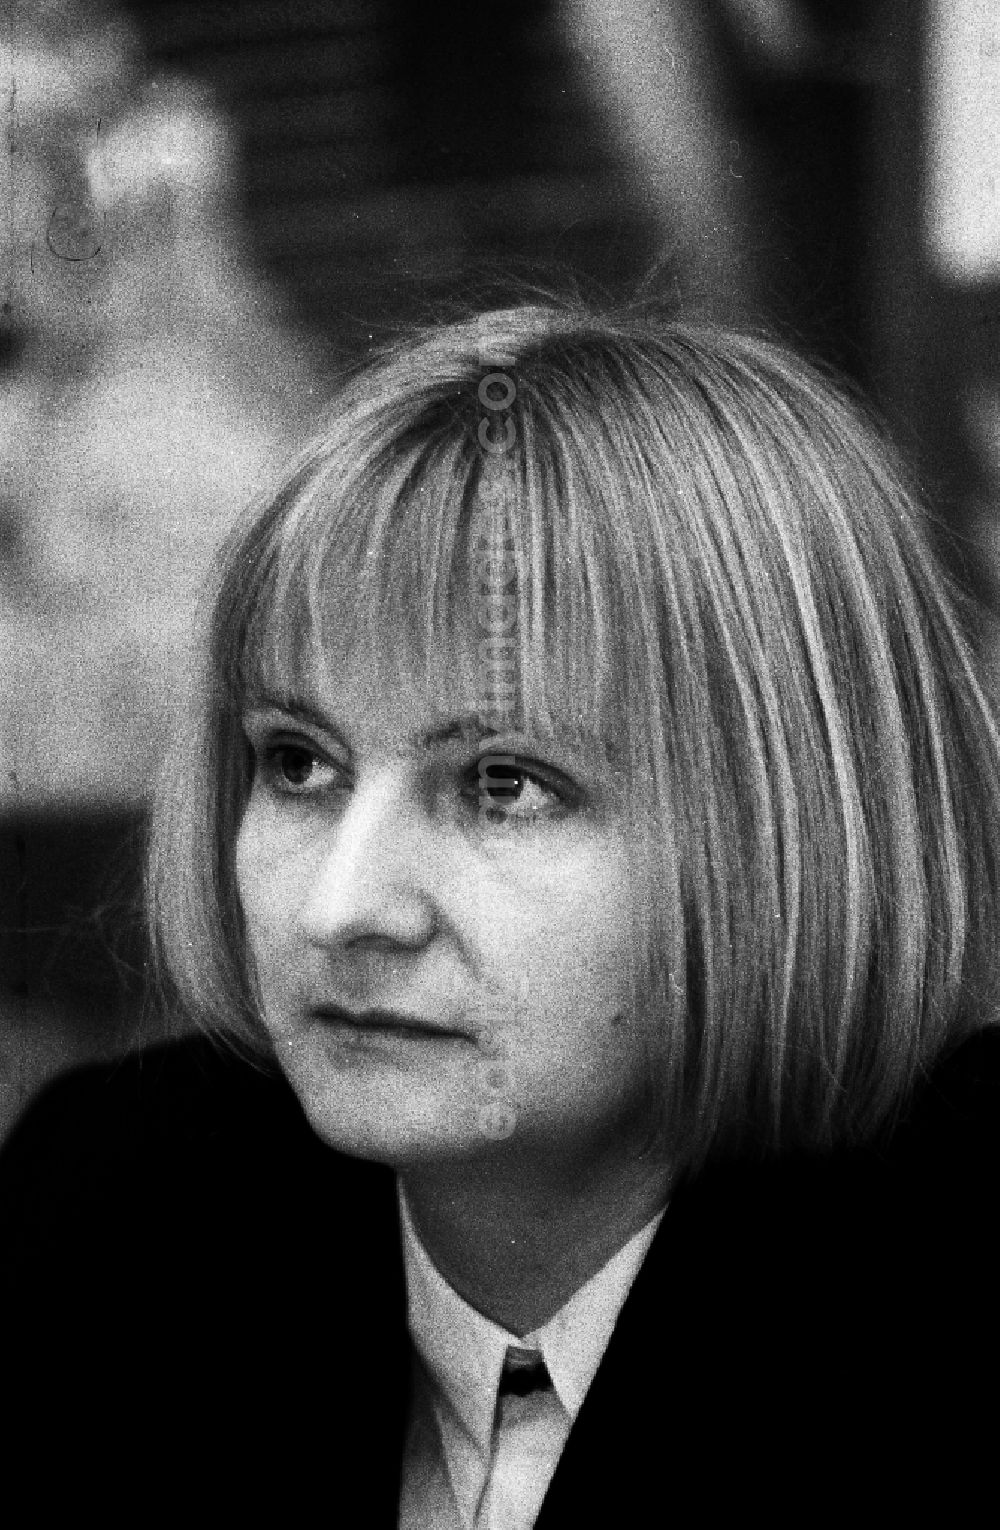 GDR photo archive: Berlin - Portrait of the politician and civil rights activist Vera Wollenberger at a press conference in the district of Prenzlauer Berg in Berlin East Berlin on the territory of the former GDR, German Democratic Republic